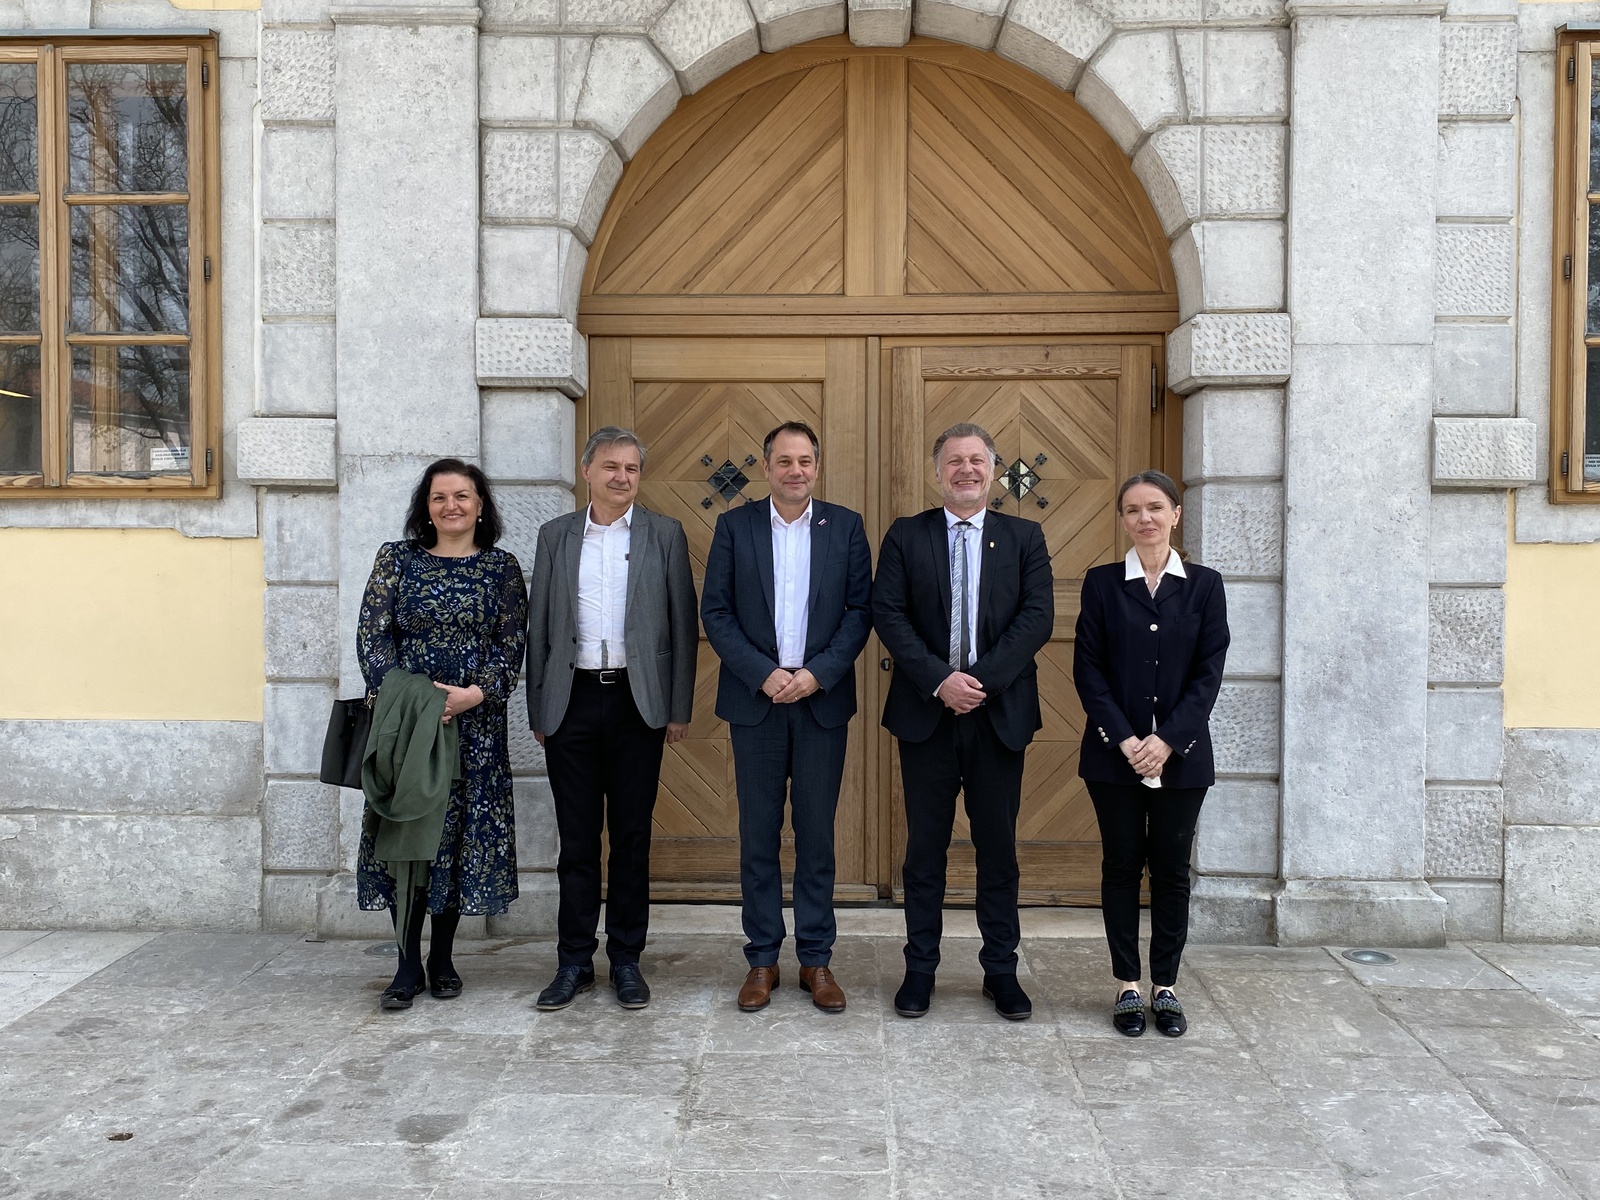 From left to right: Suzana Martinez, Head of the Government Office for Slovenians Abroad, Prof. Dr. Matjaž Valant, Vice-rector for Education and Arts, Matej Arčon, Minister for Slovenians abroad, Prof. Dr. Boštjan Golob, Rector of the University of the Nova Gorica, Prof. Dr. Saša Dobričič, Director of postgraduate doctoral study programmes Cultural Heritage Studies.